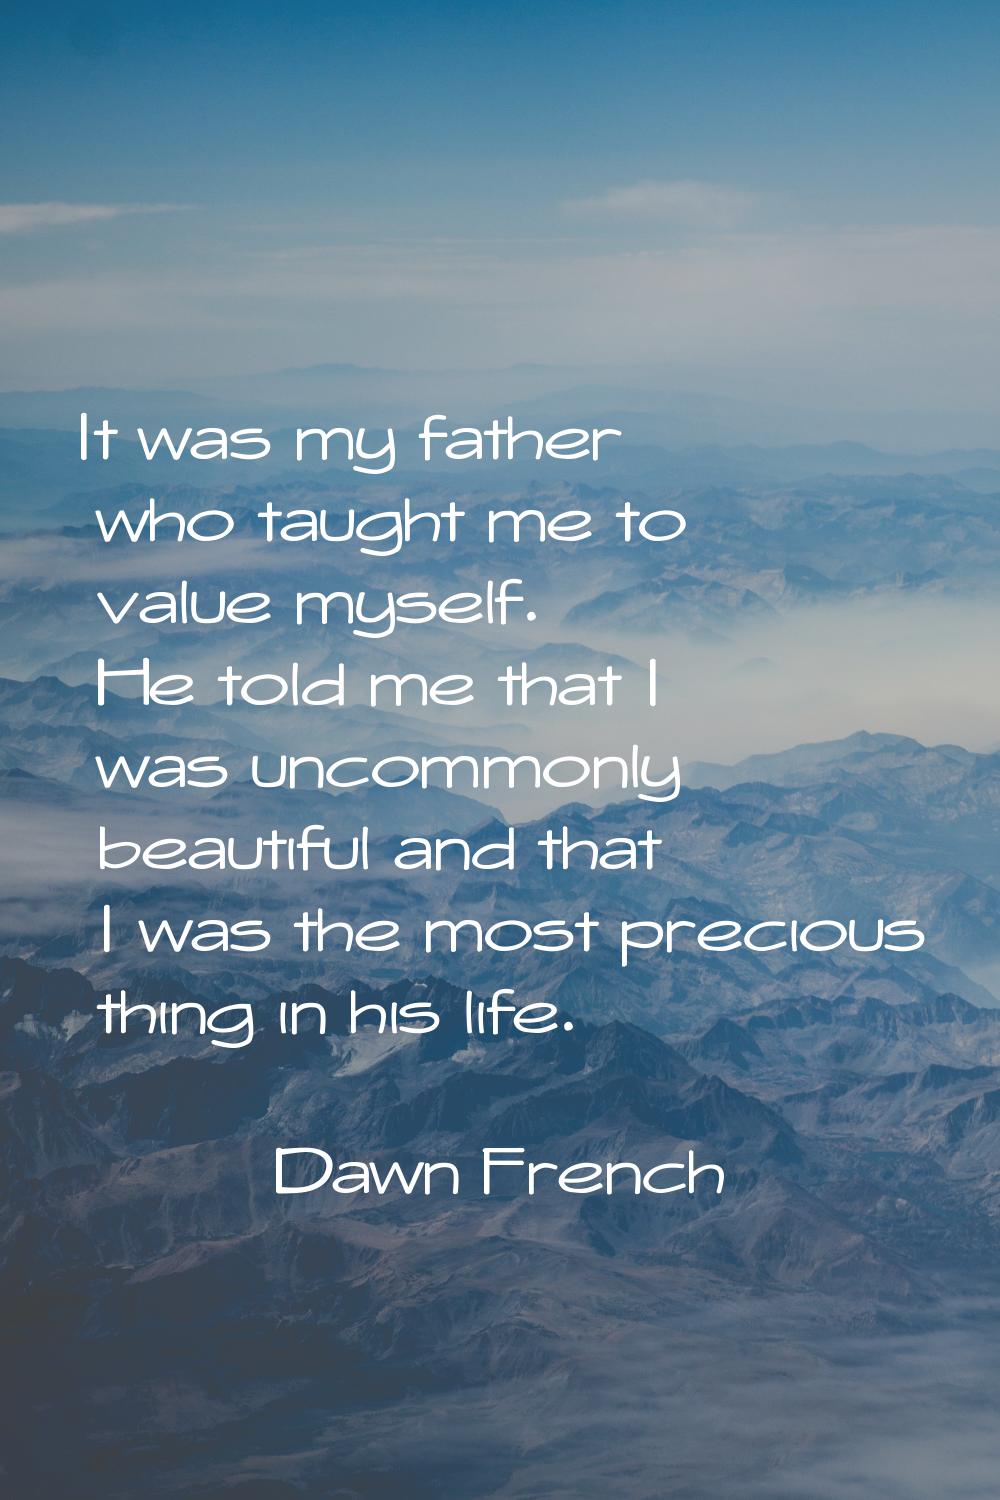 It was my father who taught me to value myself. He told me that I was uncommonly beautiful and that